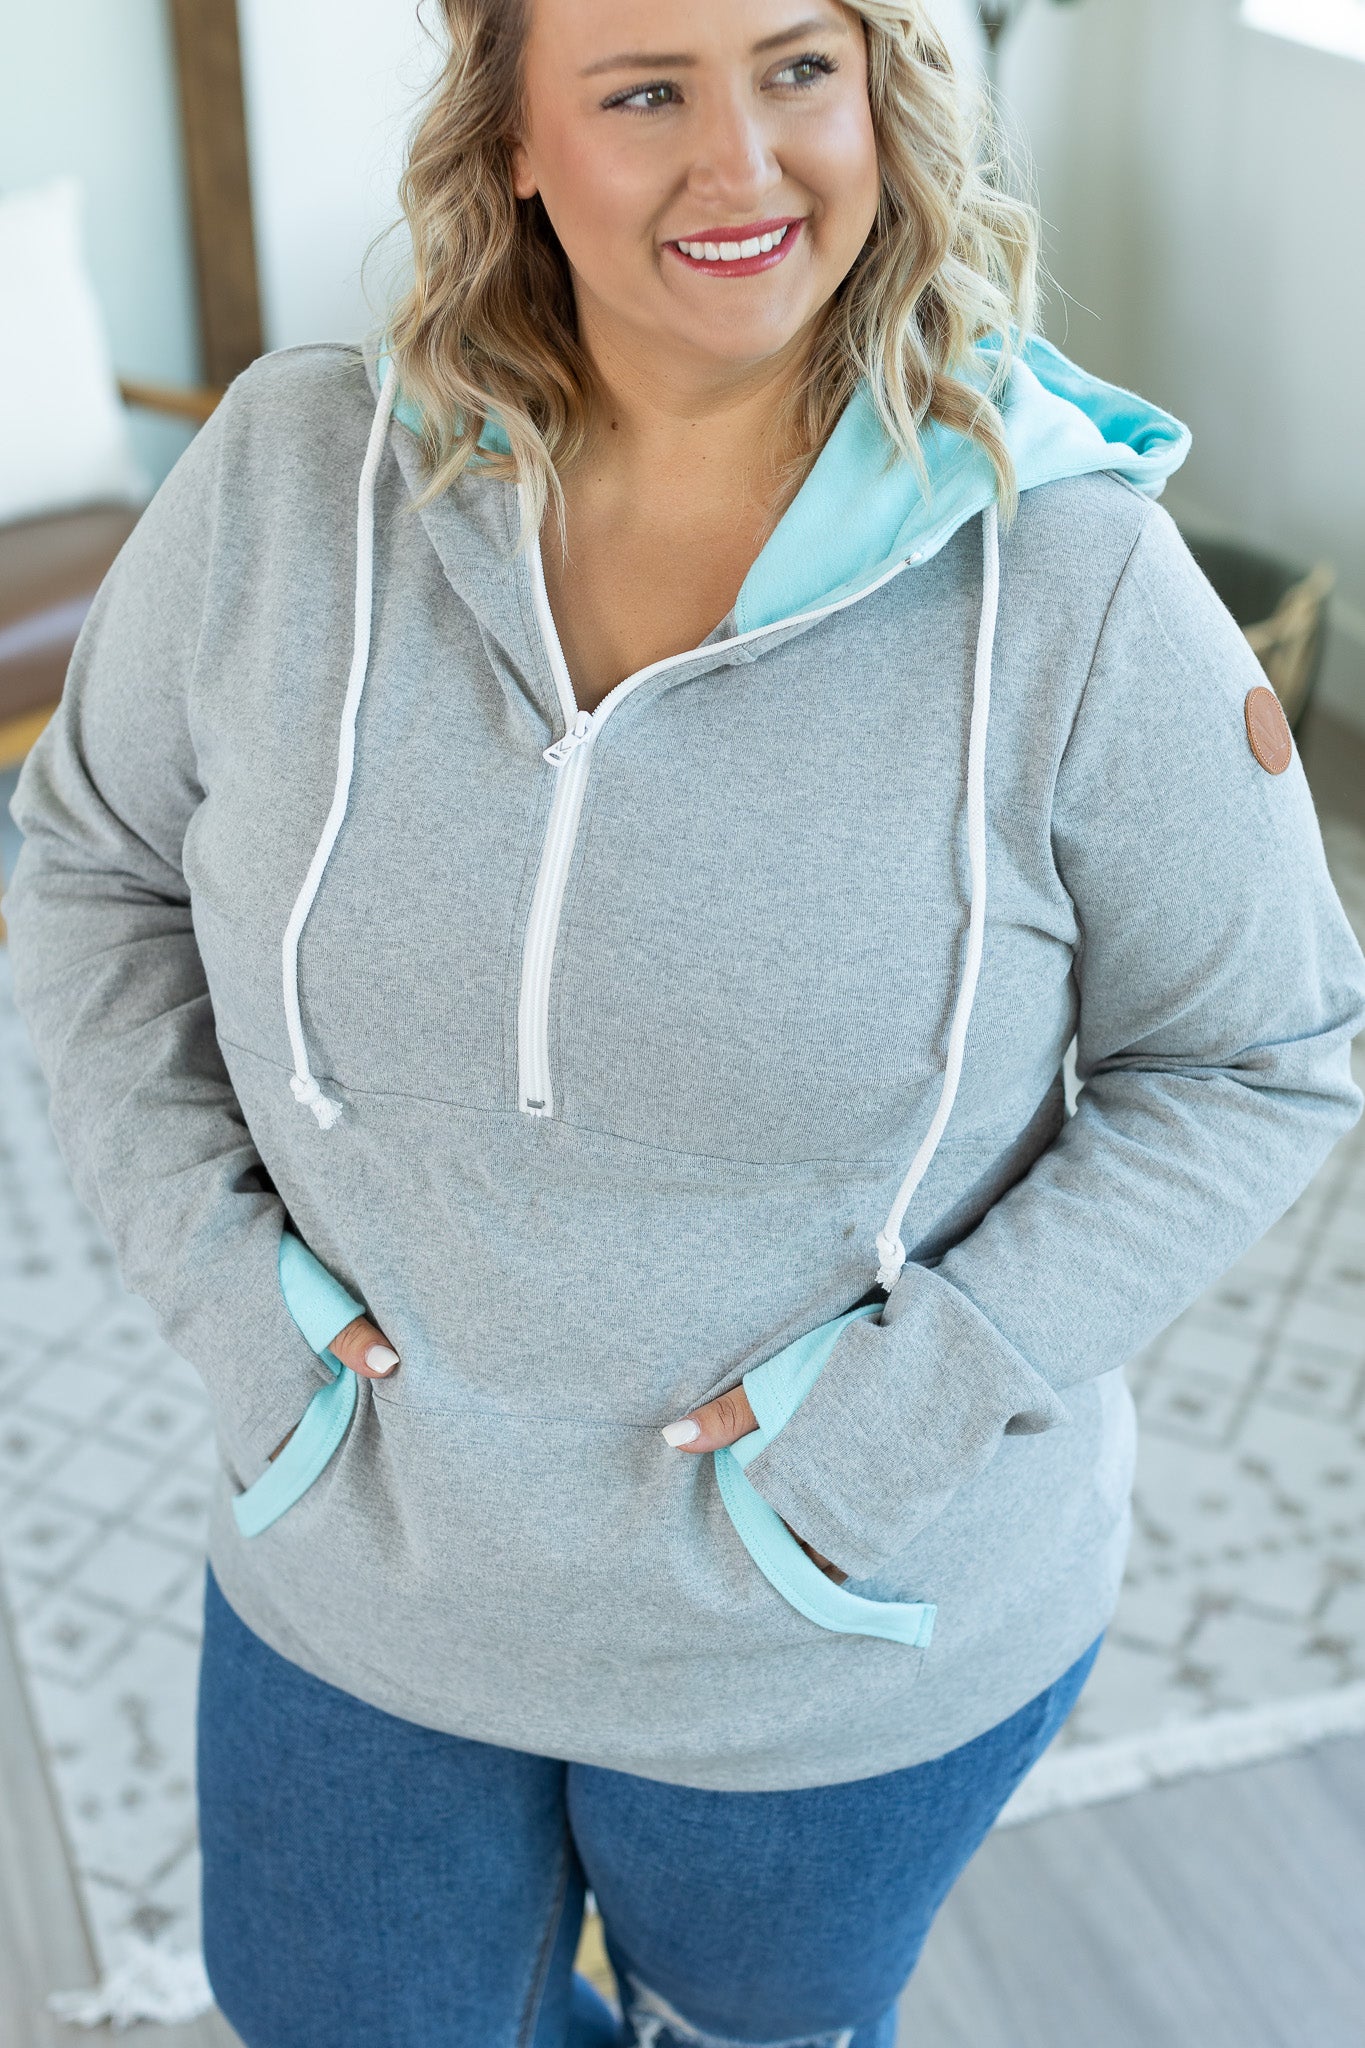 IN STOCK Avery Accent HalfZip Hoodie - Grey and Aqua - AnnRose Boutique